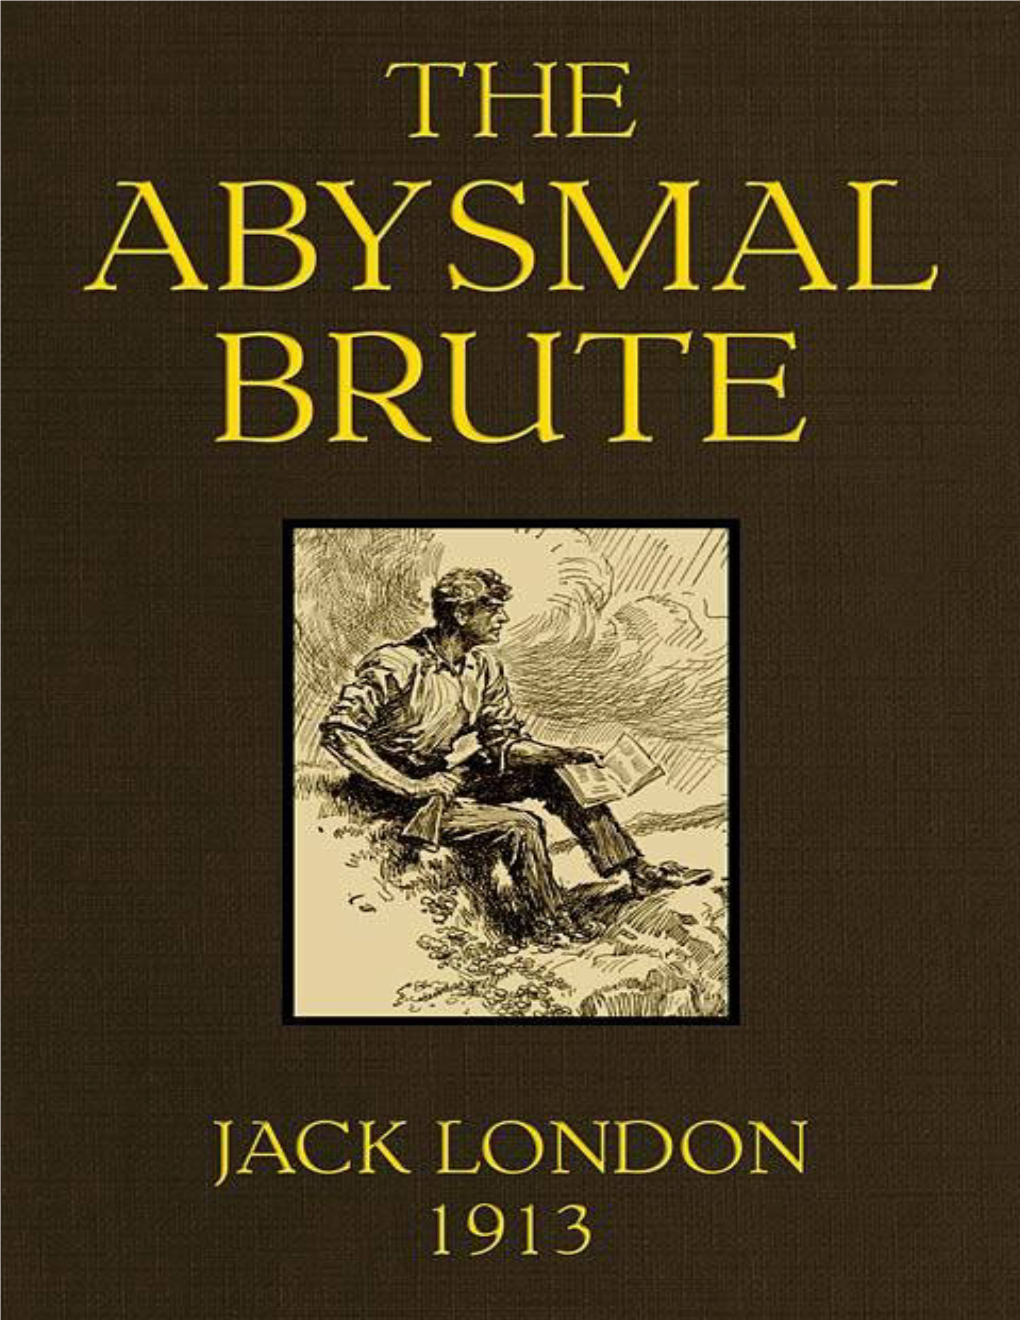 The Abysmal Brute, by Jack London